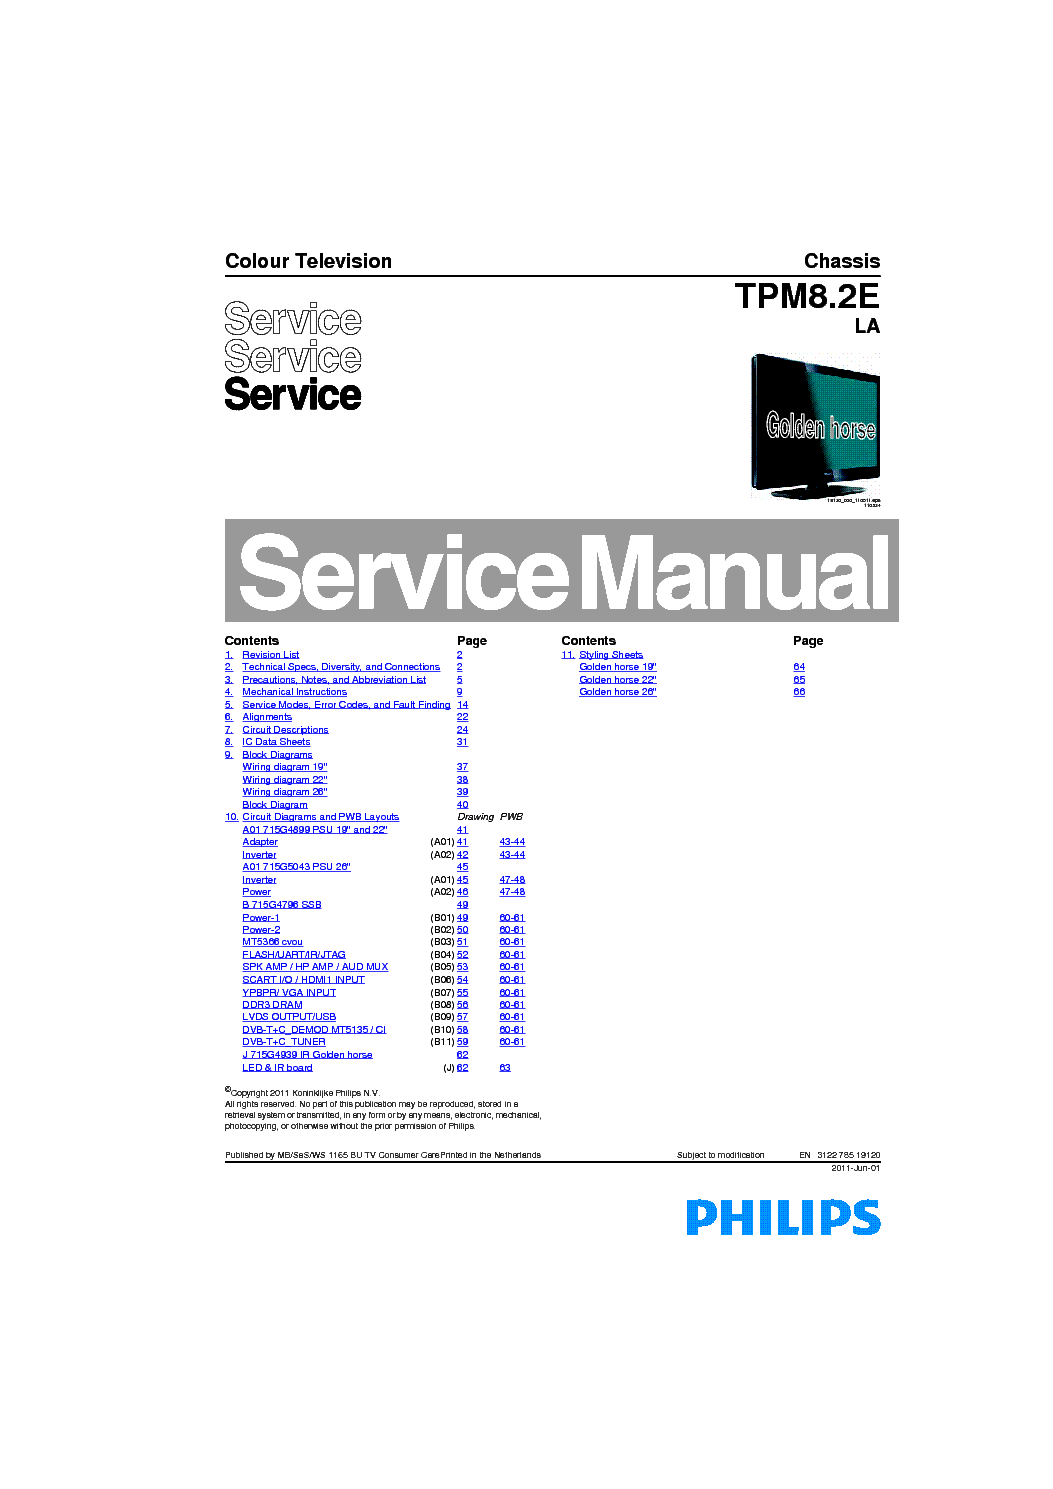 PHILIPS TPM8.2ELA 312278519120 service manual (1st page)